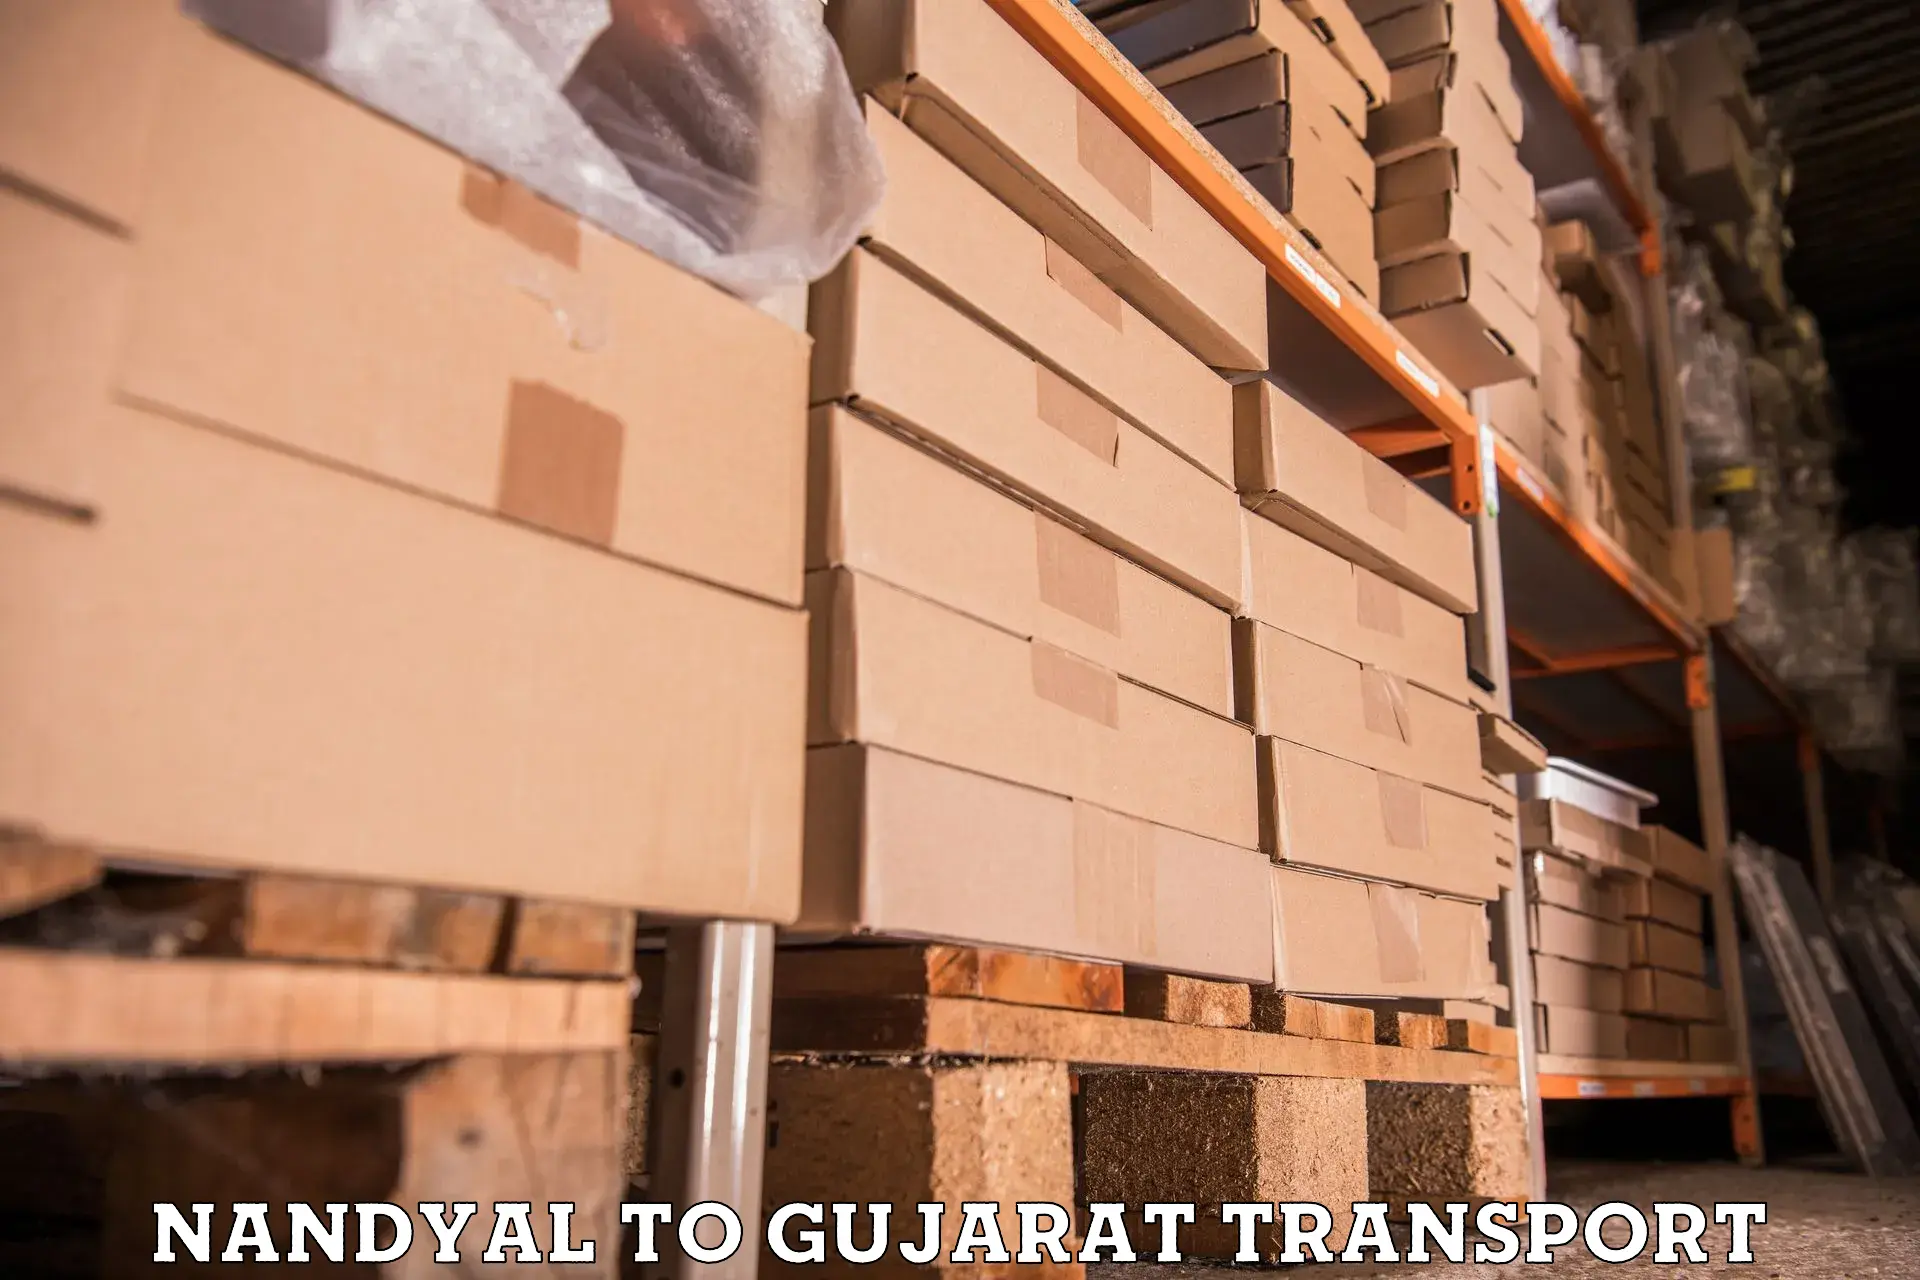 Commercial transport service Nandyal to Bhachau